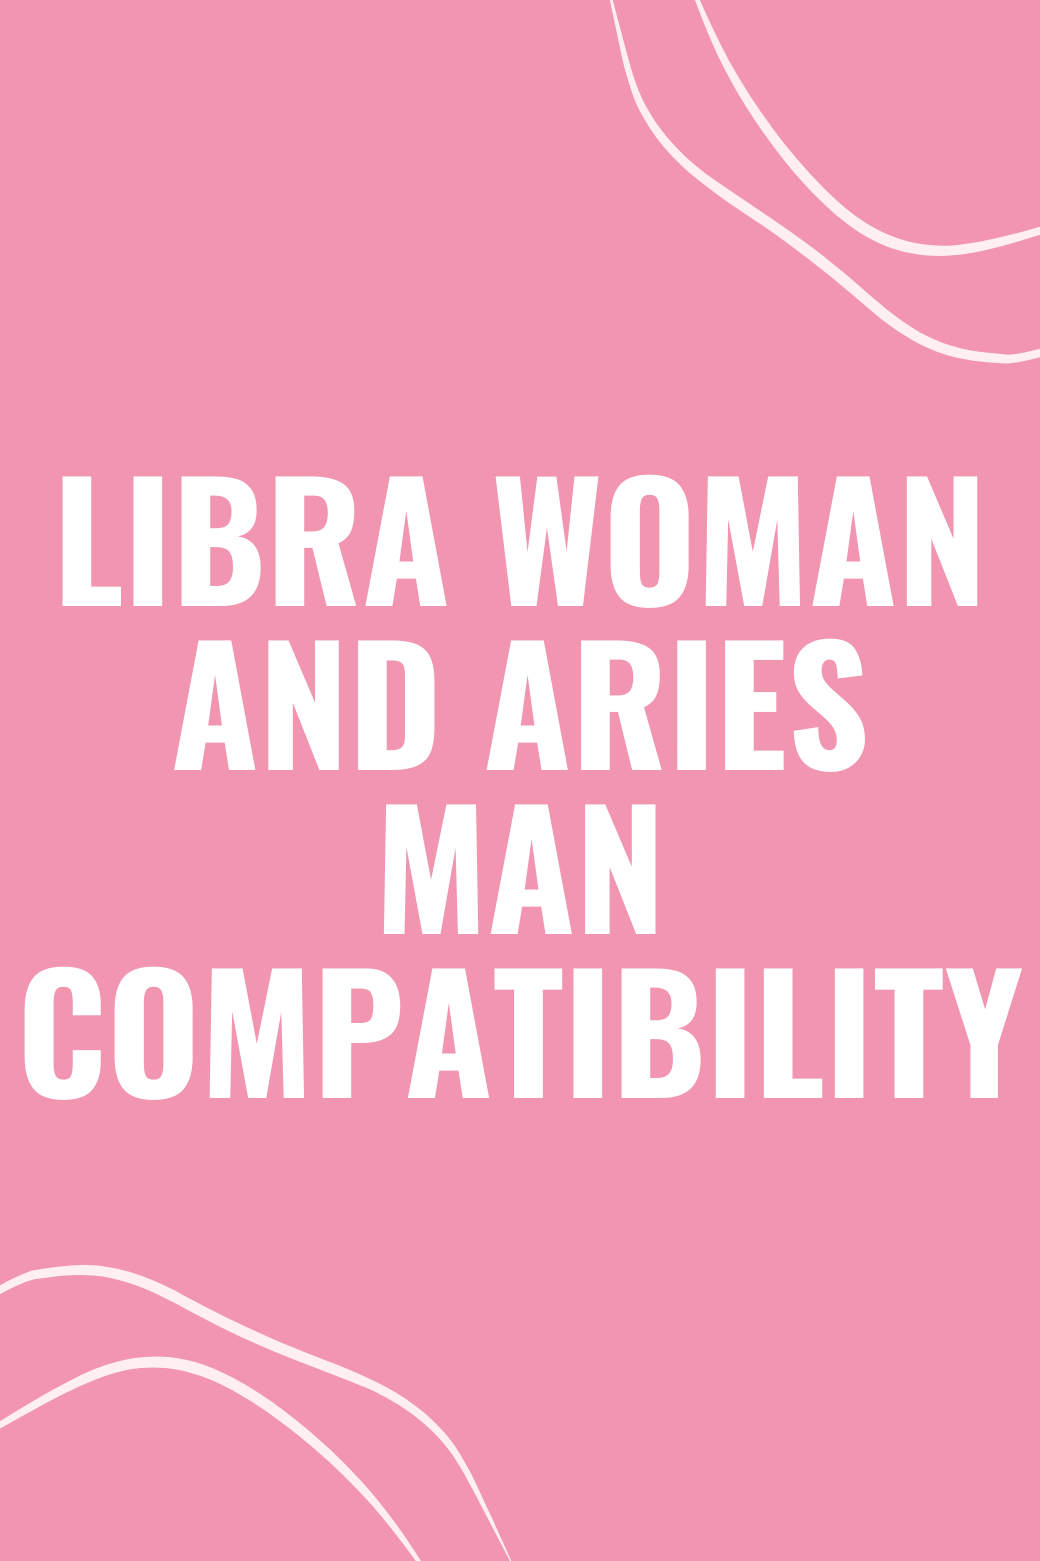 Libra Woman and Aries Man Compatibility